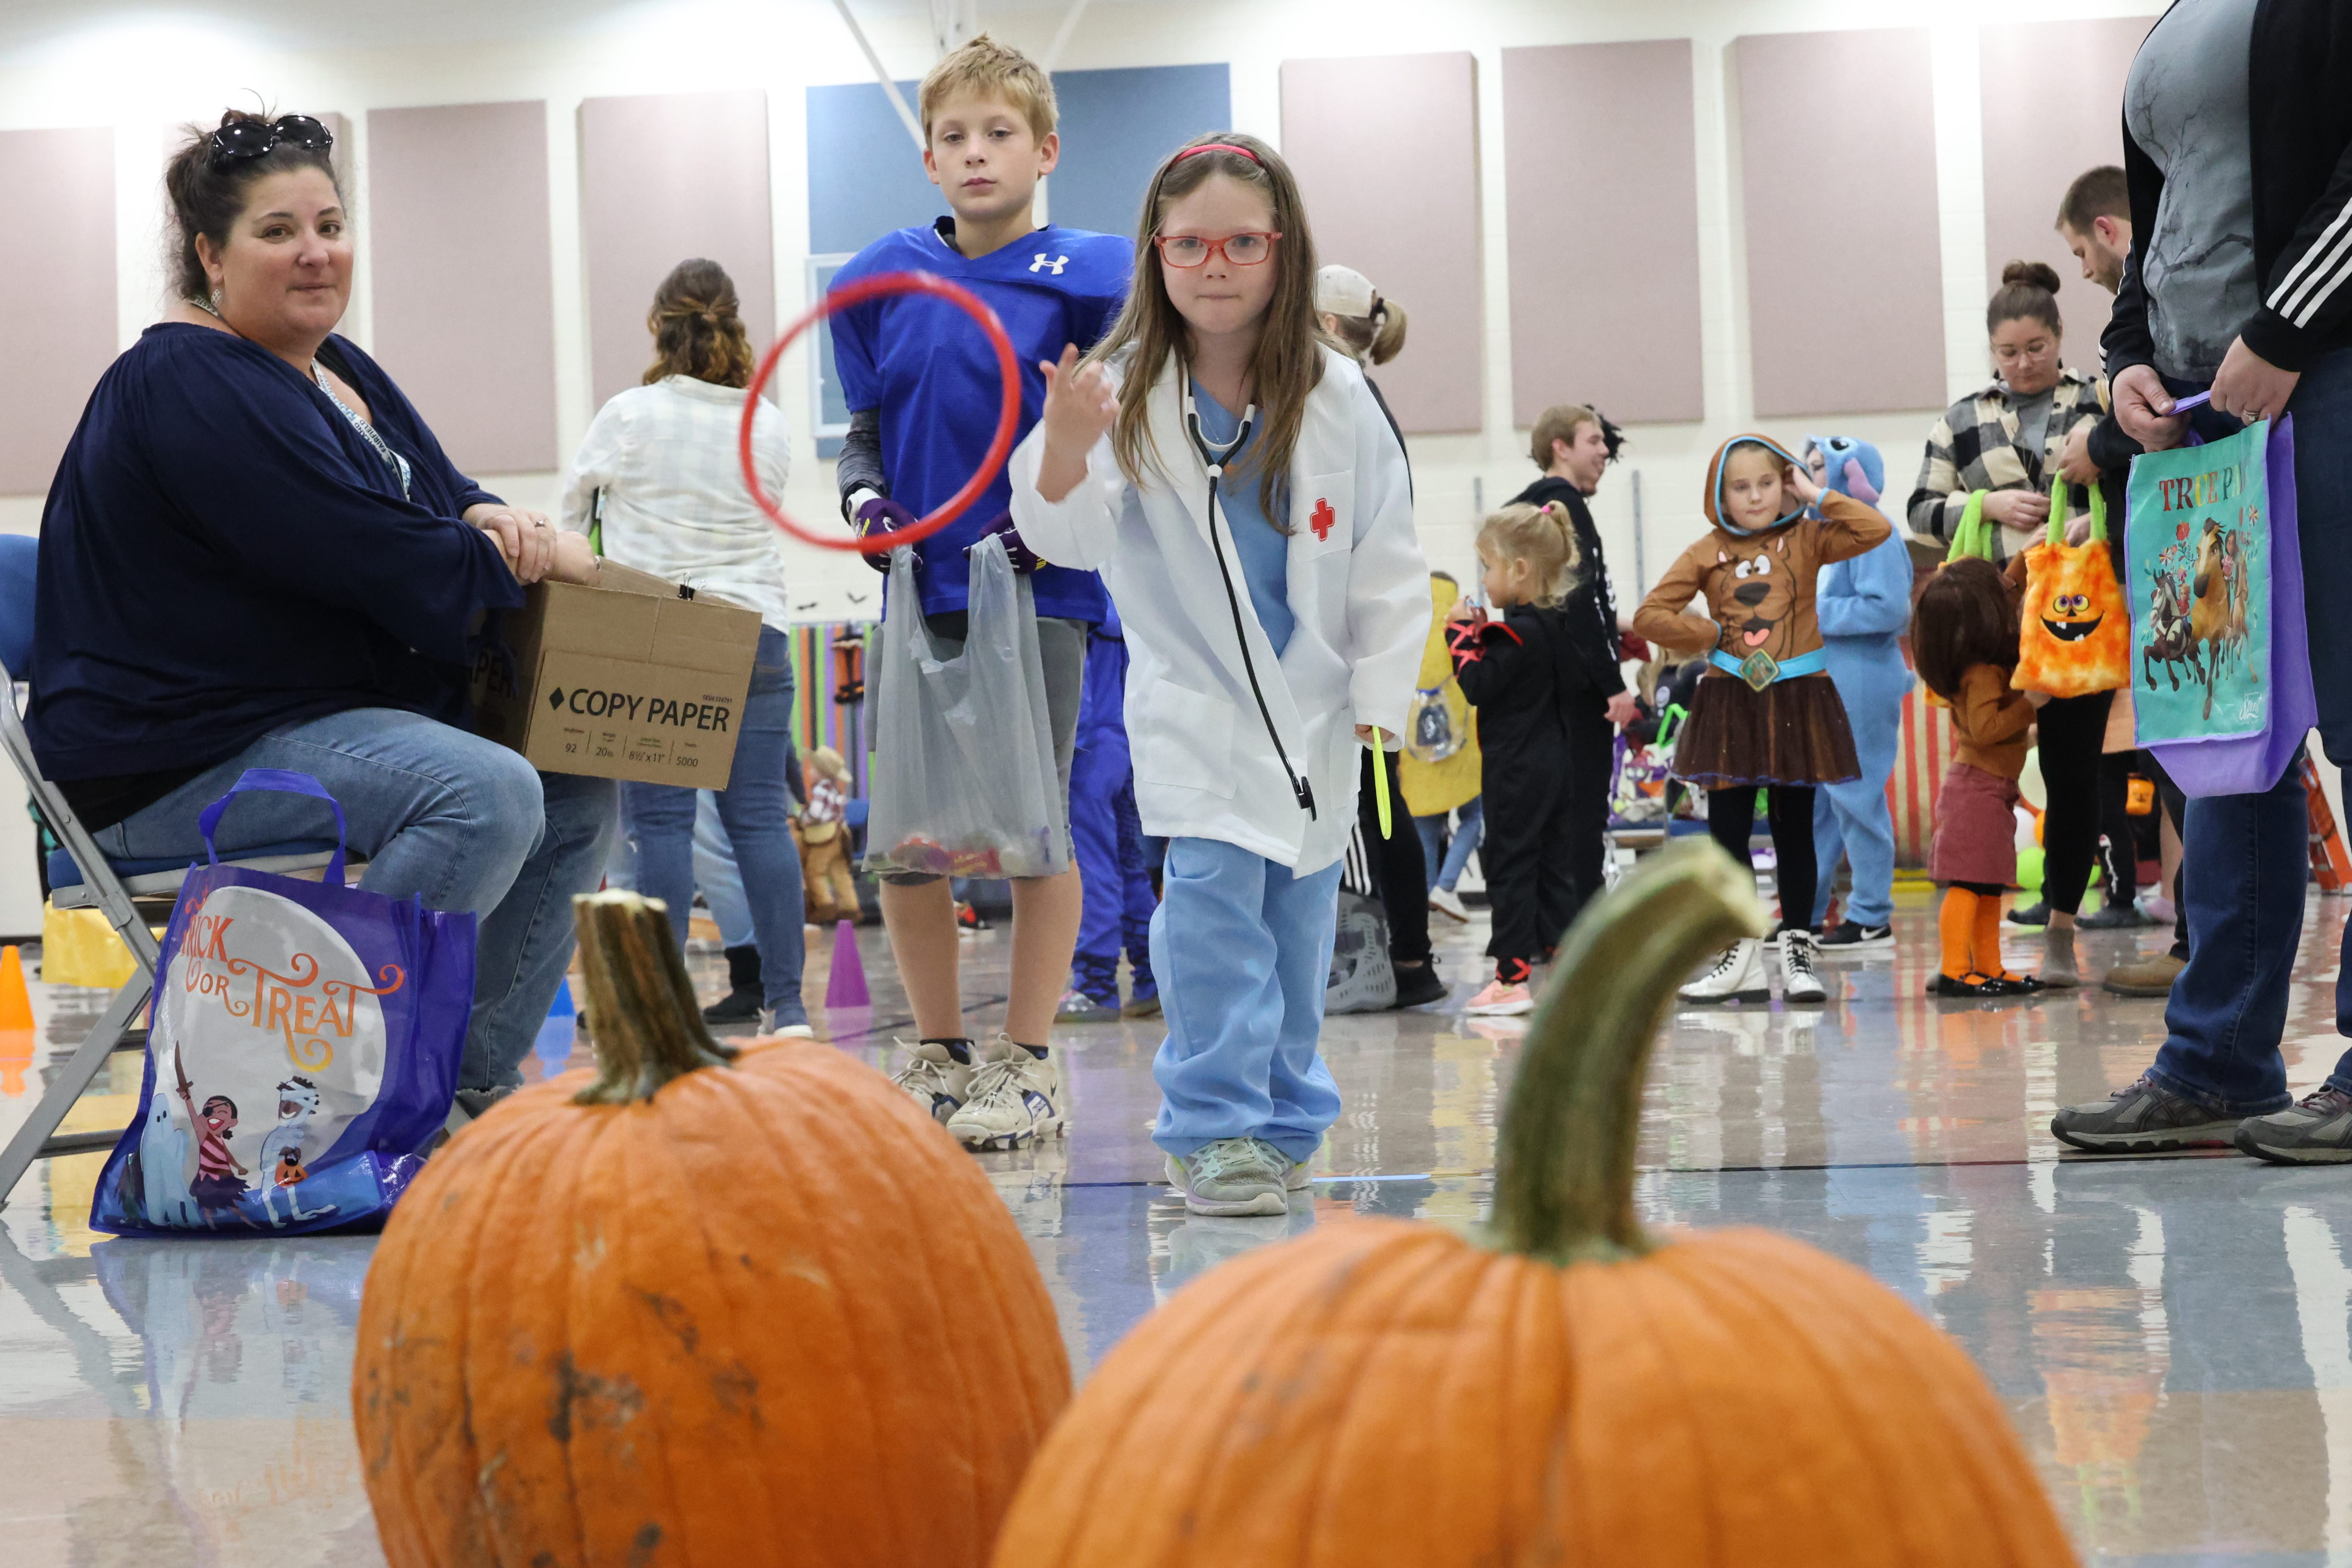 Elementary students are dressed up for Halloween and tossing rings toward pumpkin stems as part of a game.